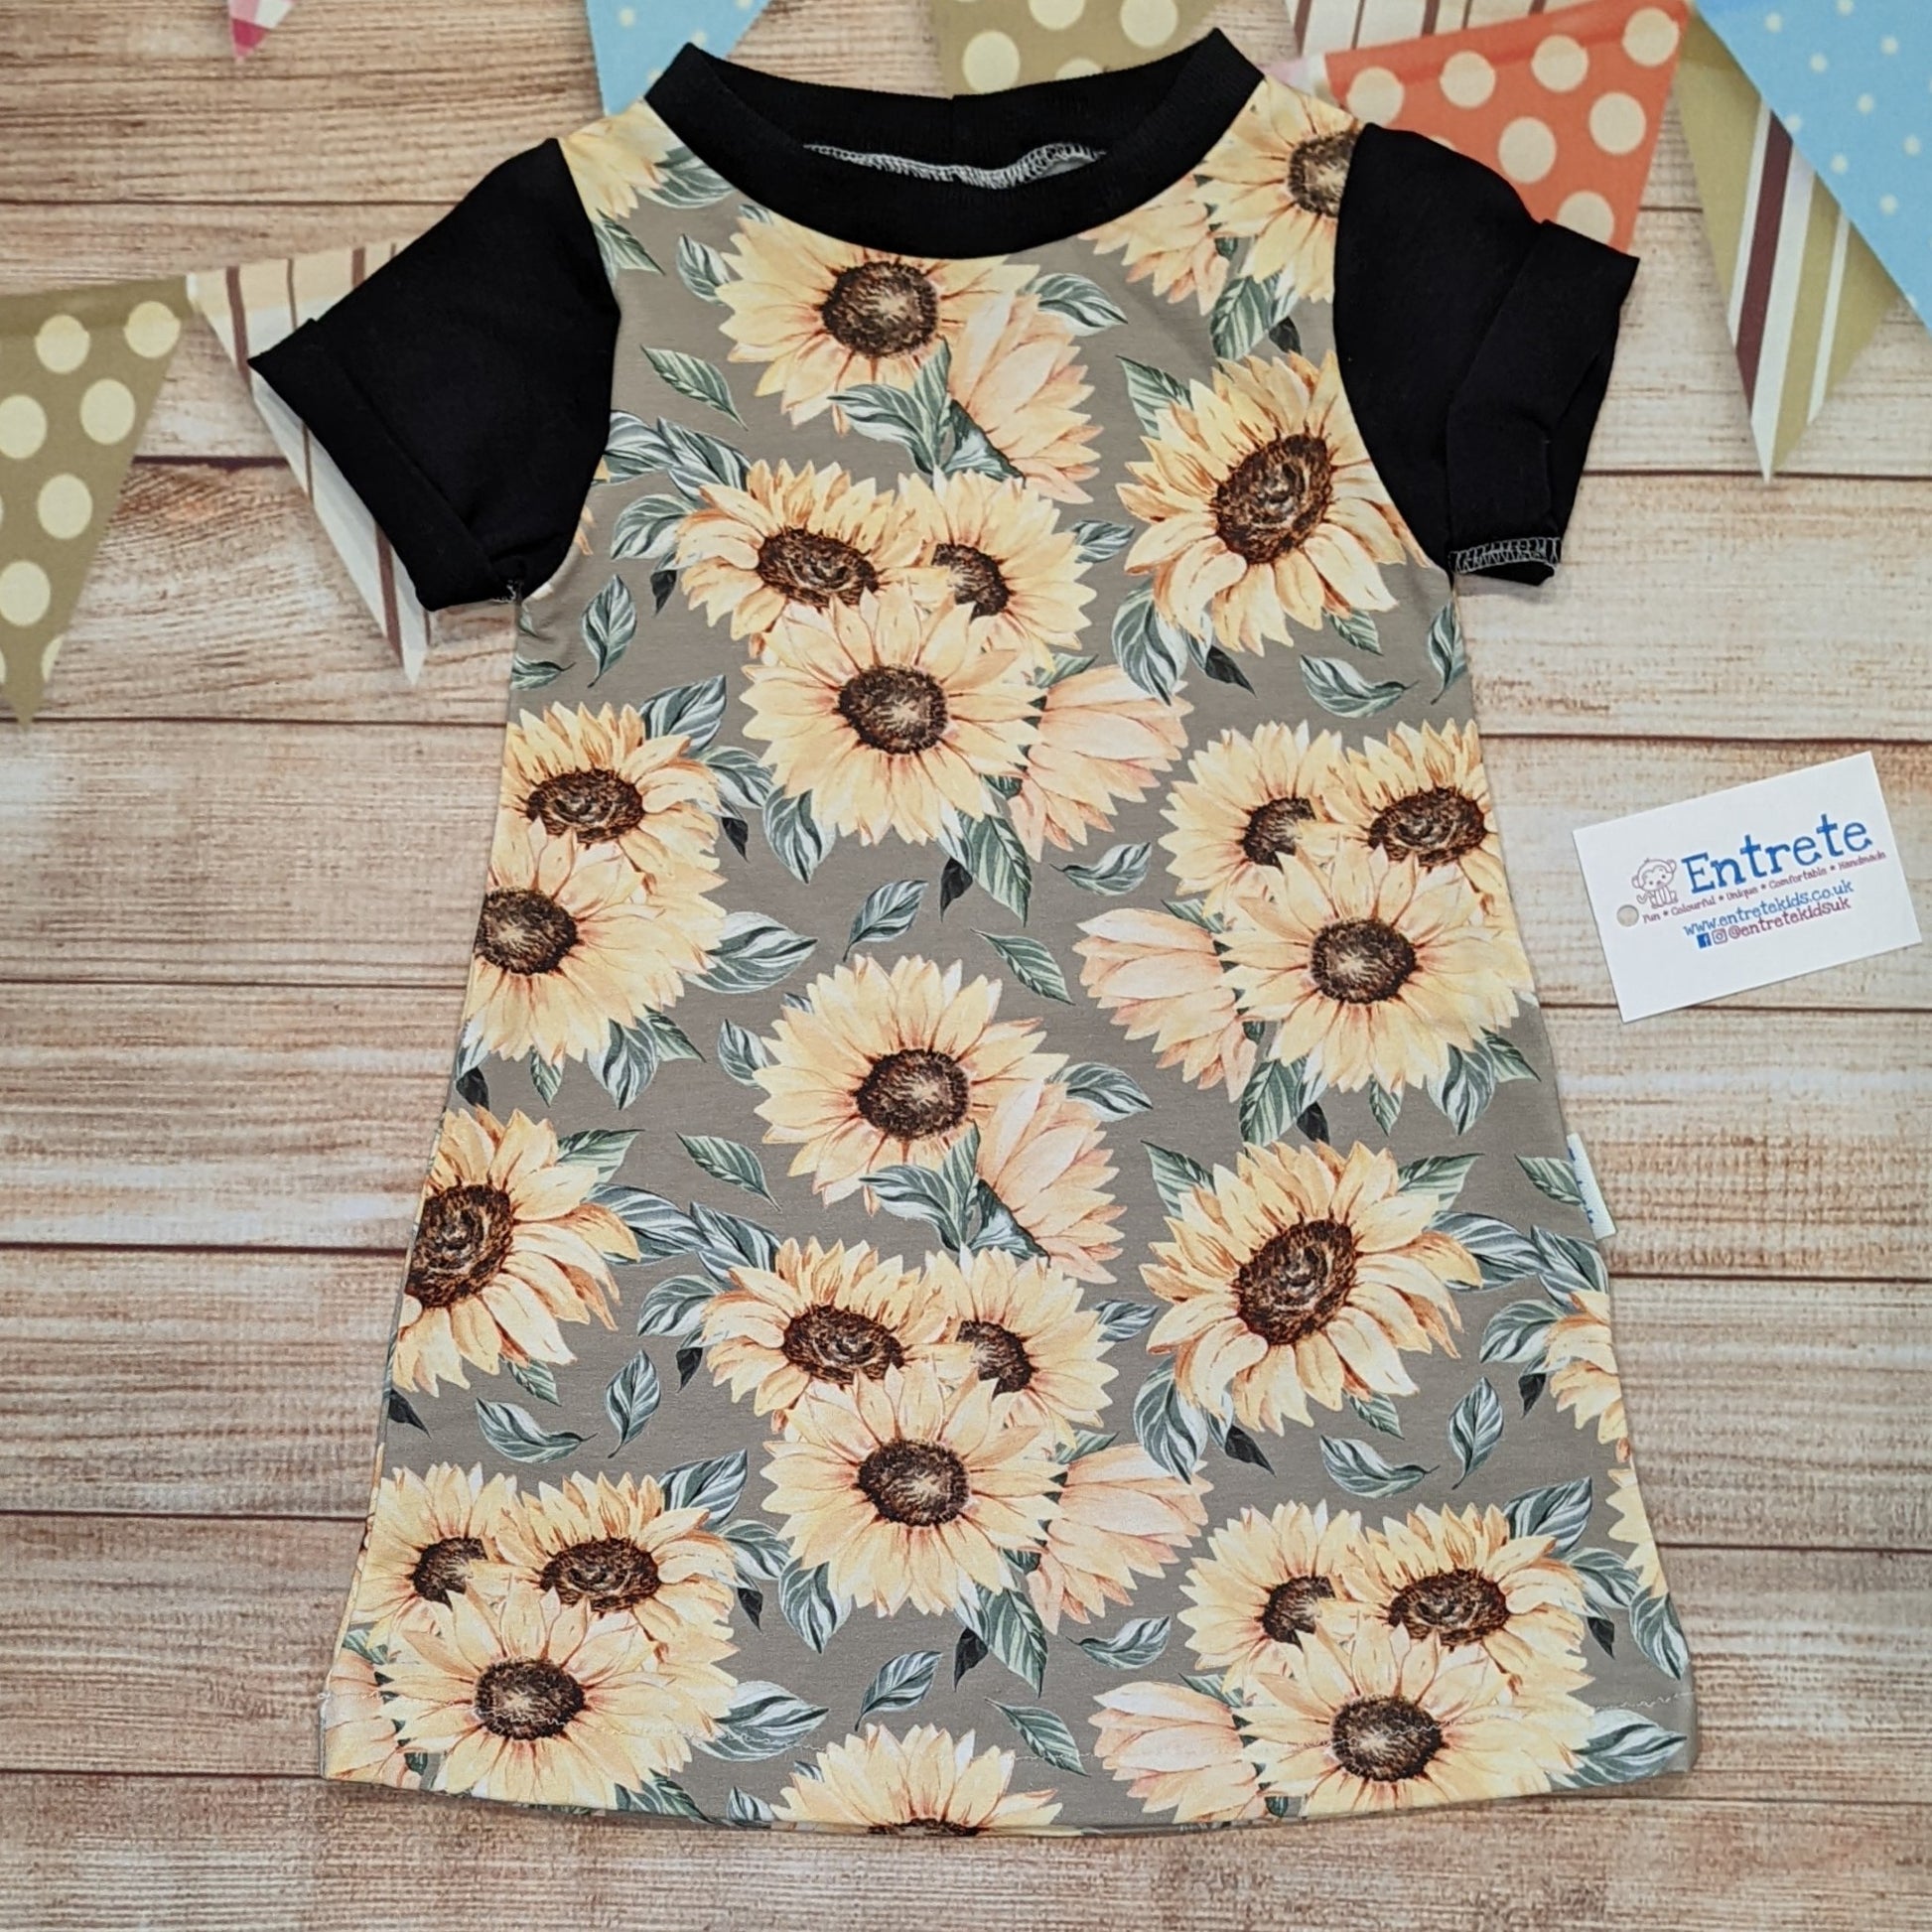 The warm sunflower T-shirt dress, handmade using sunflowers cotton French terry, black cotton jersey and black cotton ribbing. Short sleeved version shown.